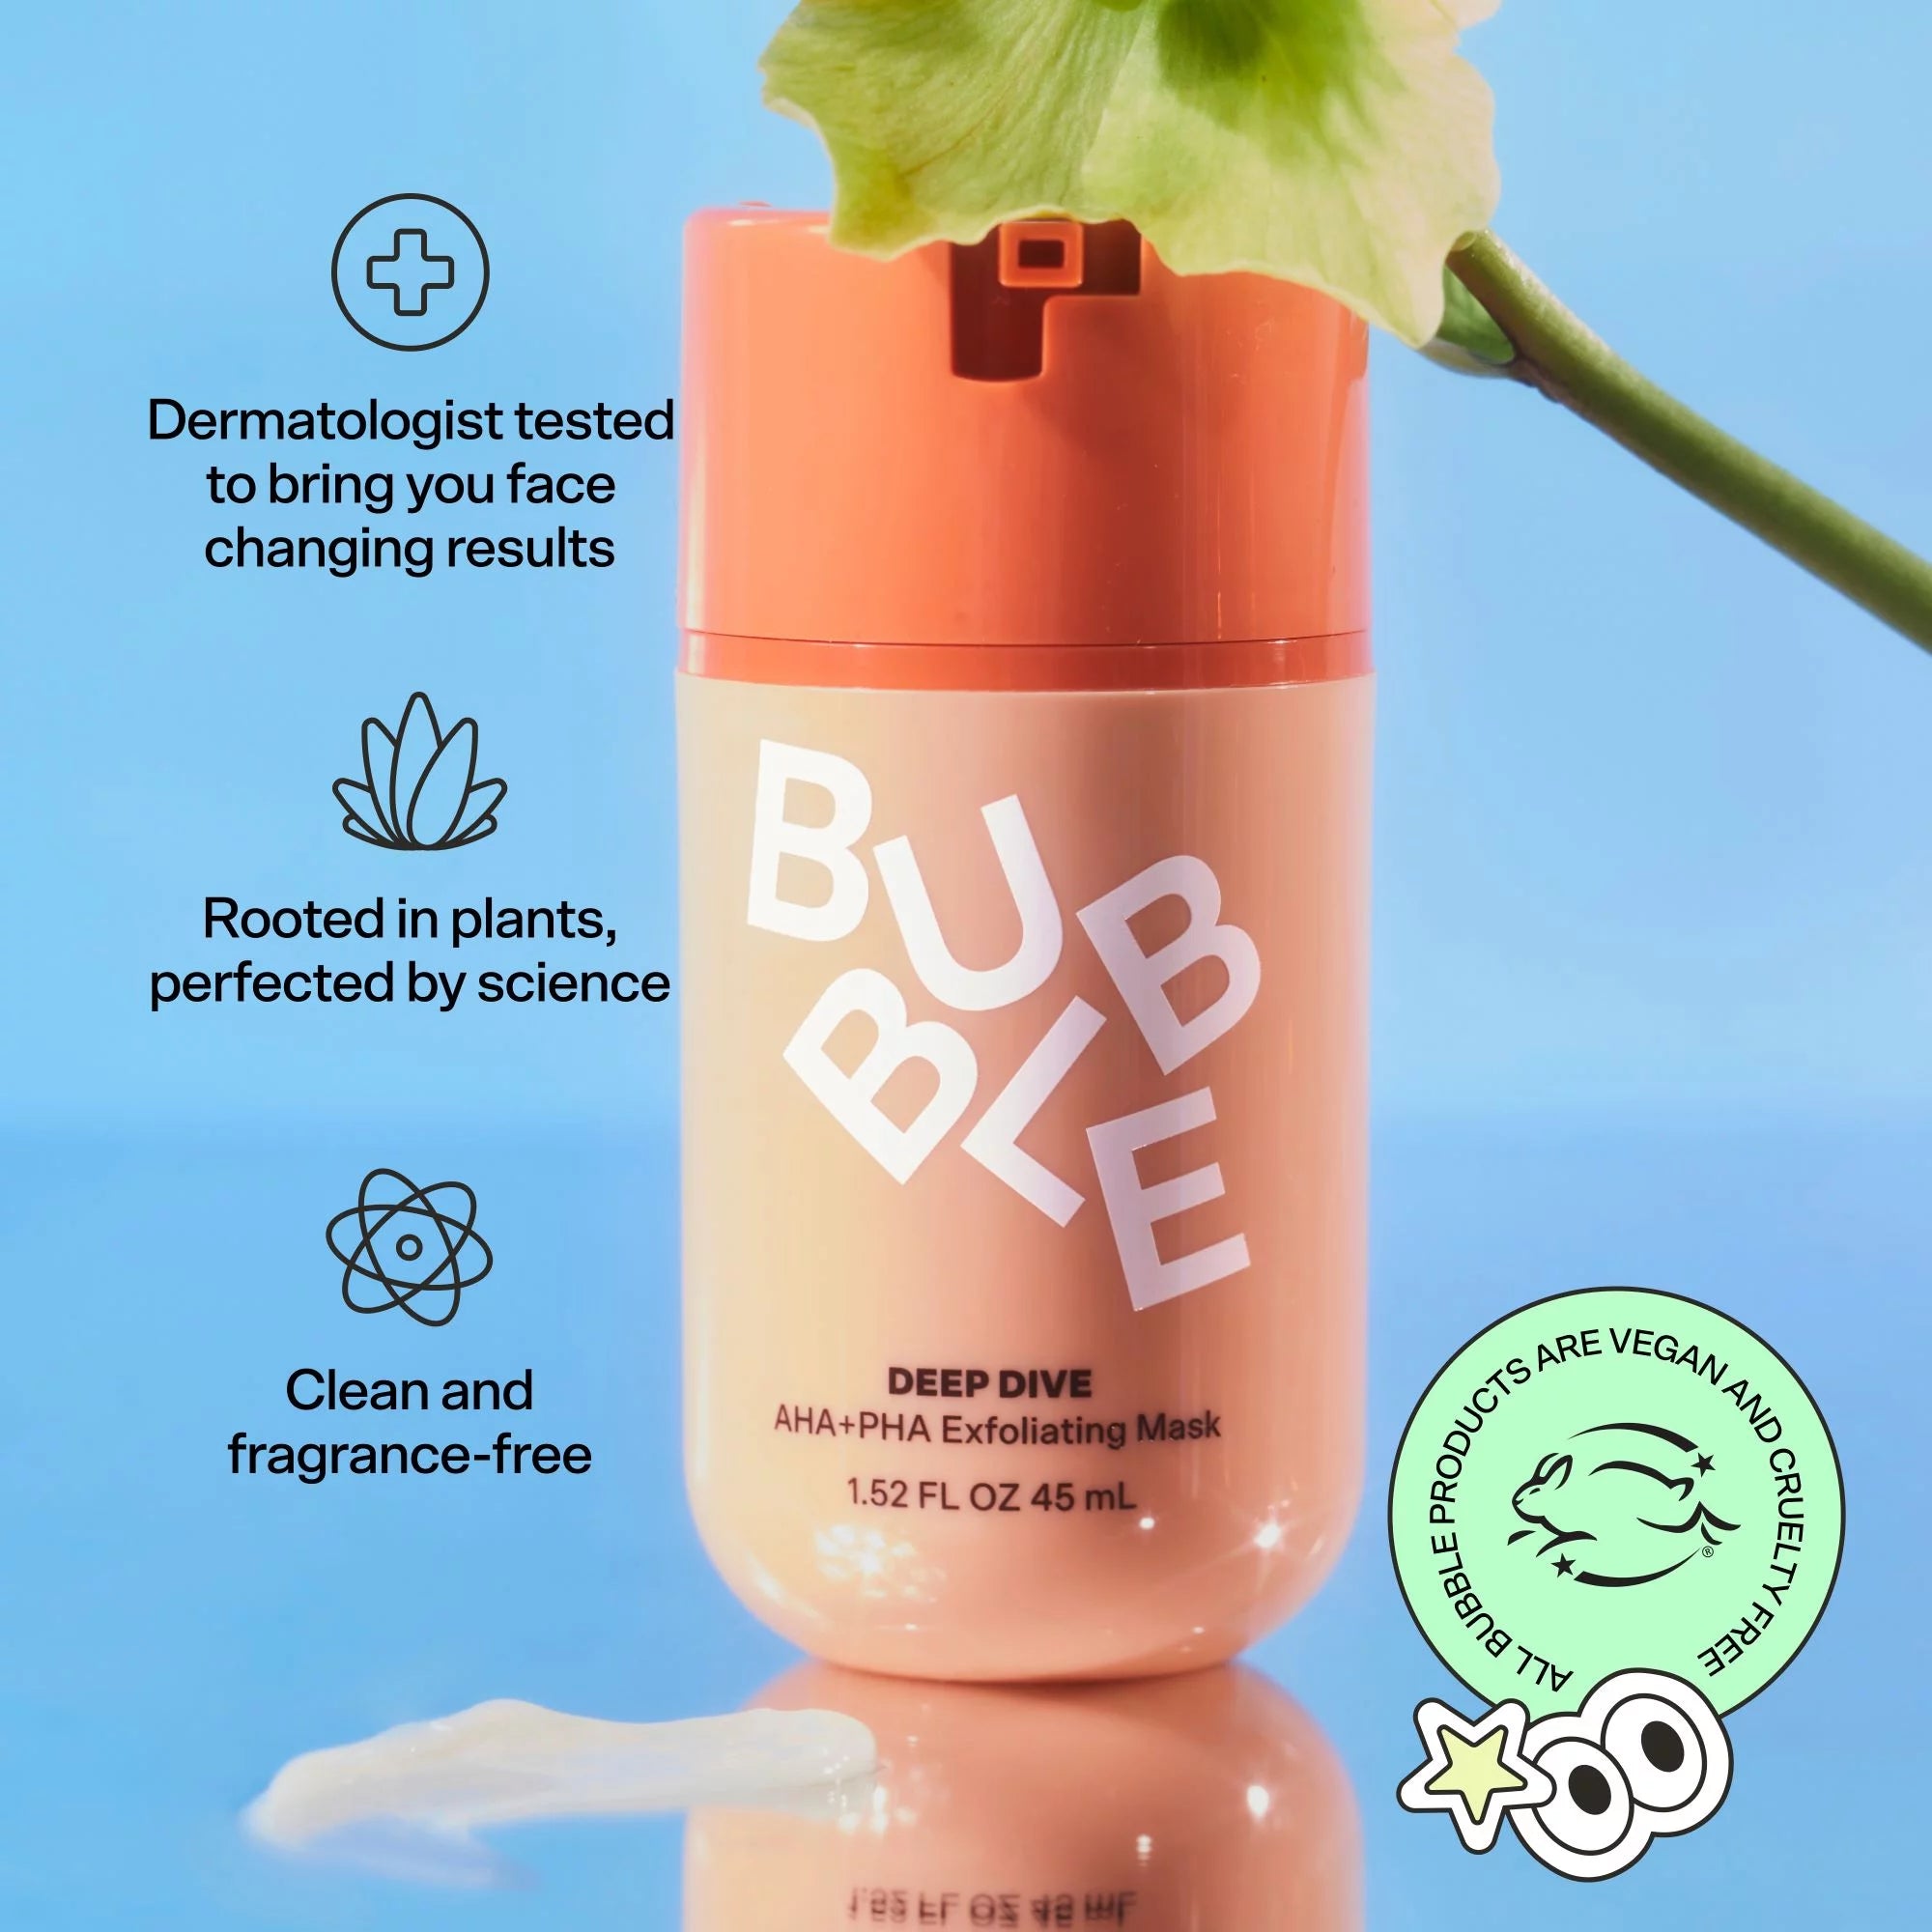  Bubble Skincare Float On Soothing Facial Oil - Safflower Seed,  Neem Seed, Prickly Pear Oil Facial Drops - Nourishing and Lightweight  Plant-Based Restorative Facial Care (30ml) : Beauty & Personal Care